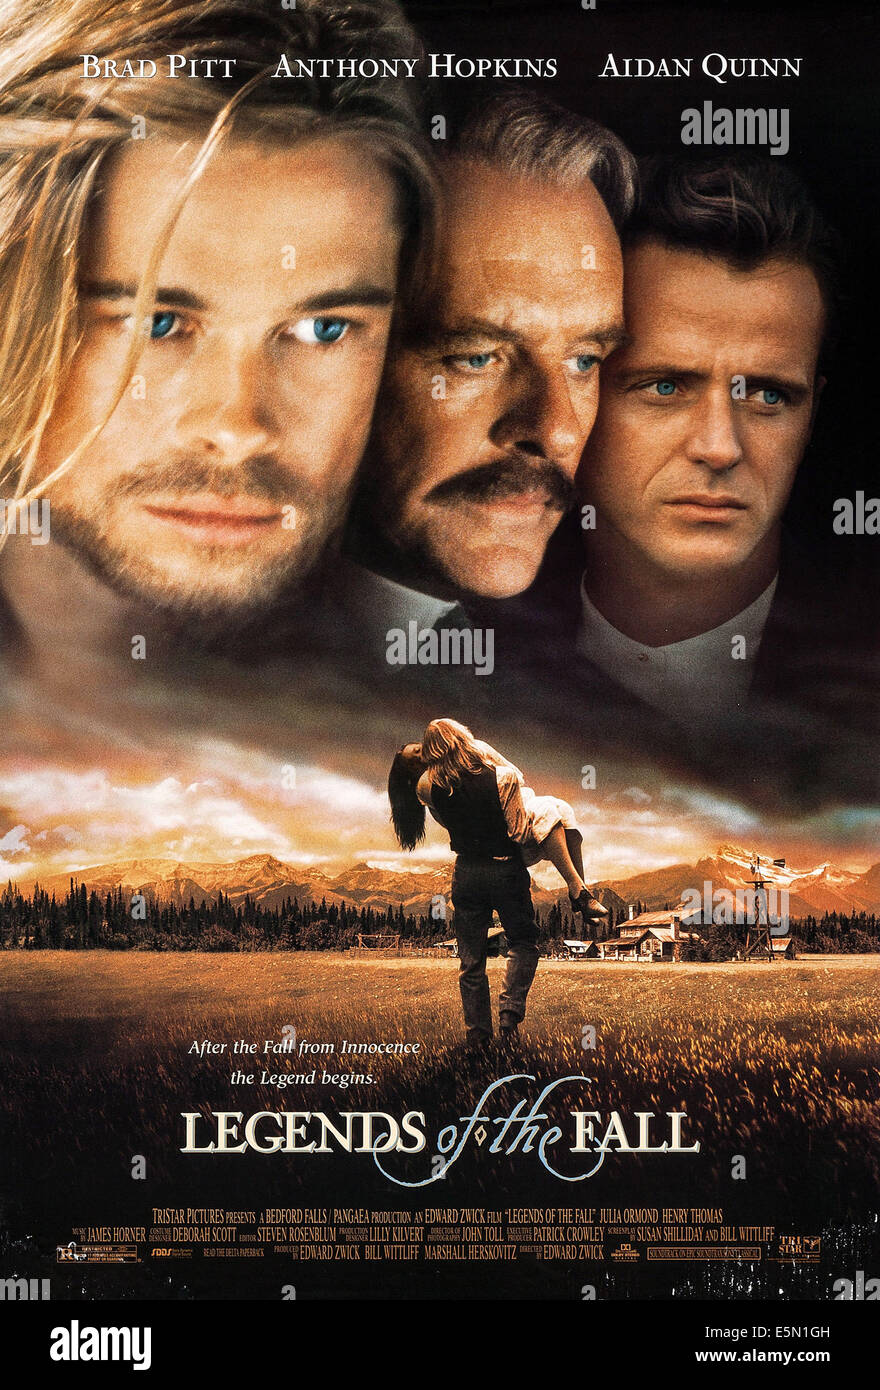 LEGENDS OF THE FALL, US poster art, from left: Brad Pitt, Anthony Hopkins, Aidan Quinn, 1994, ©TriStar Pictures/courtesy Stock Photo